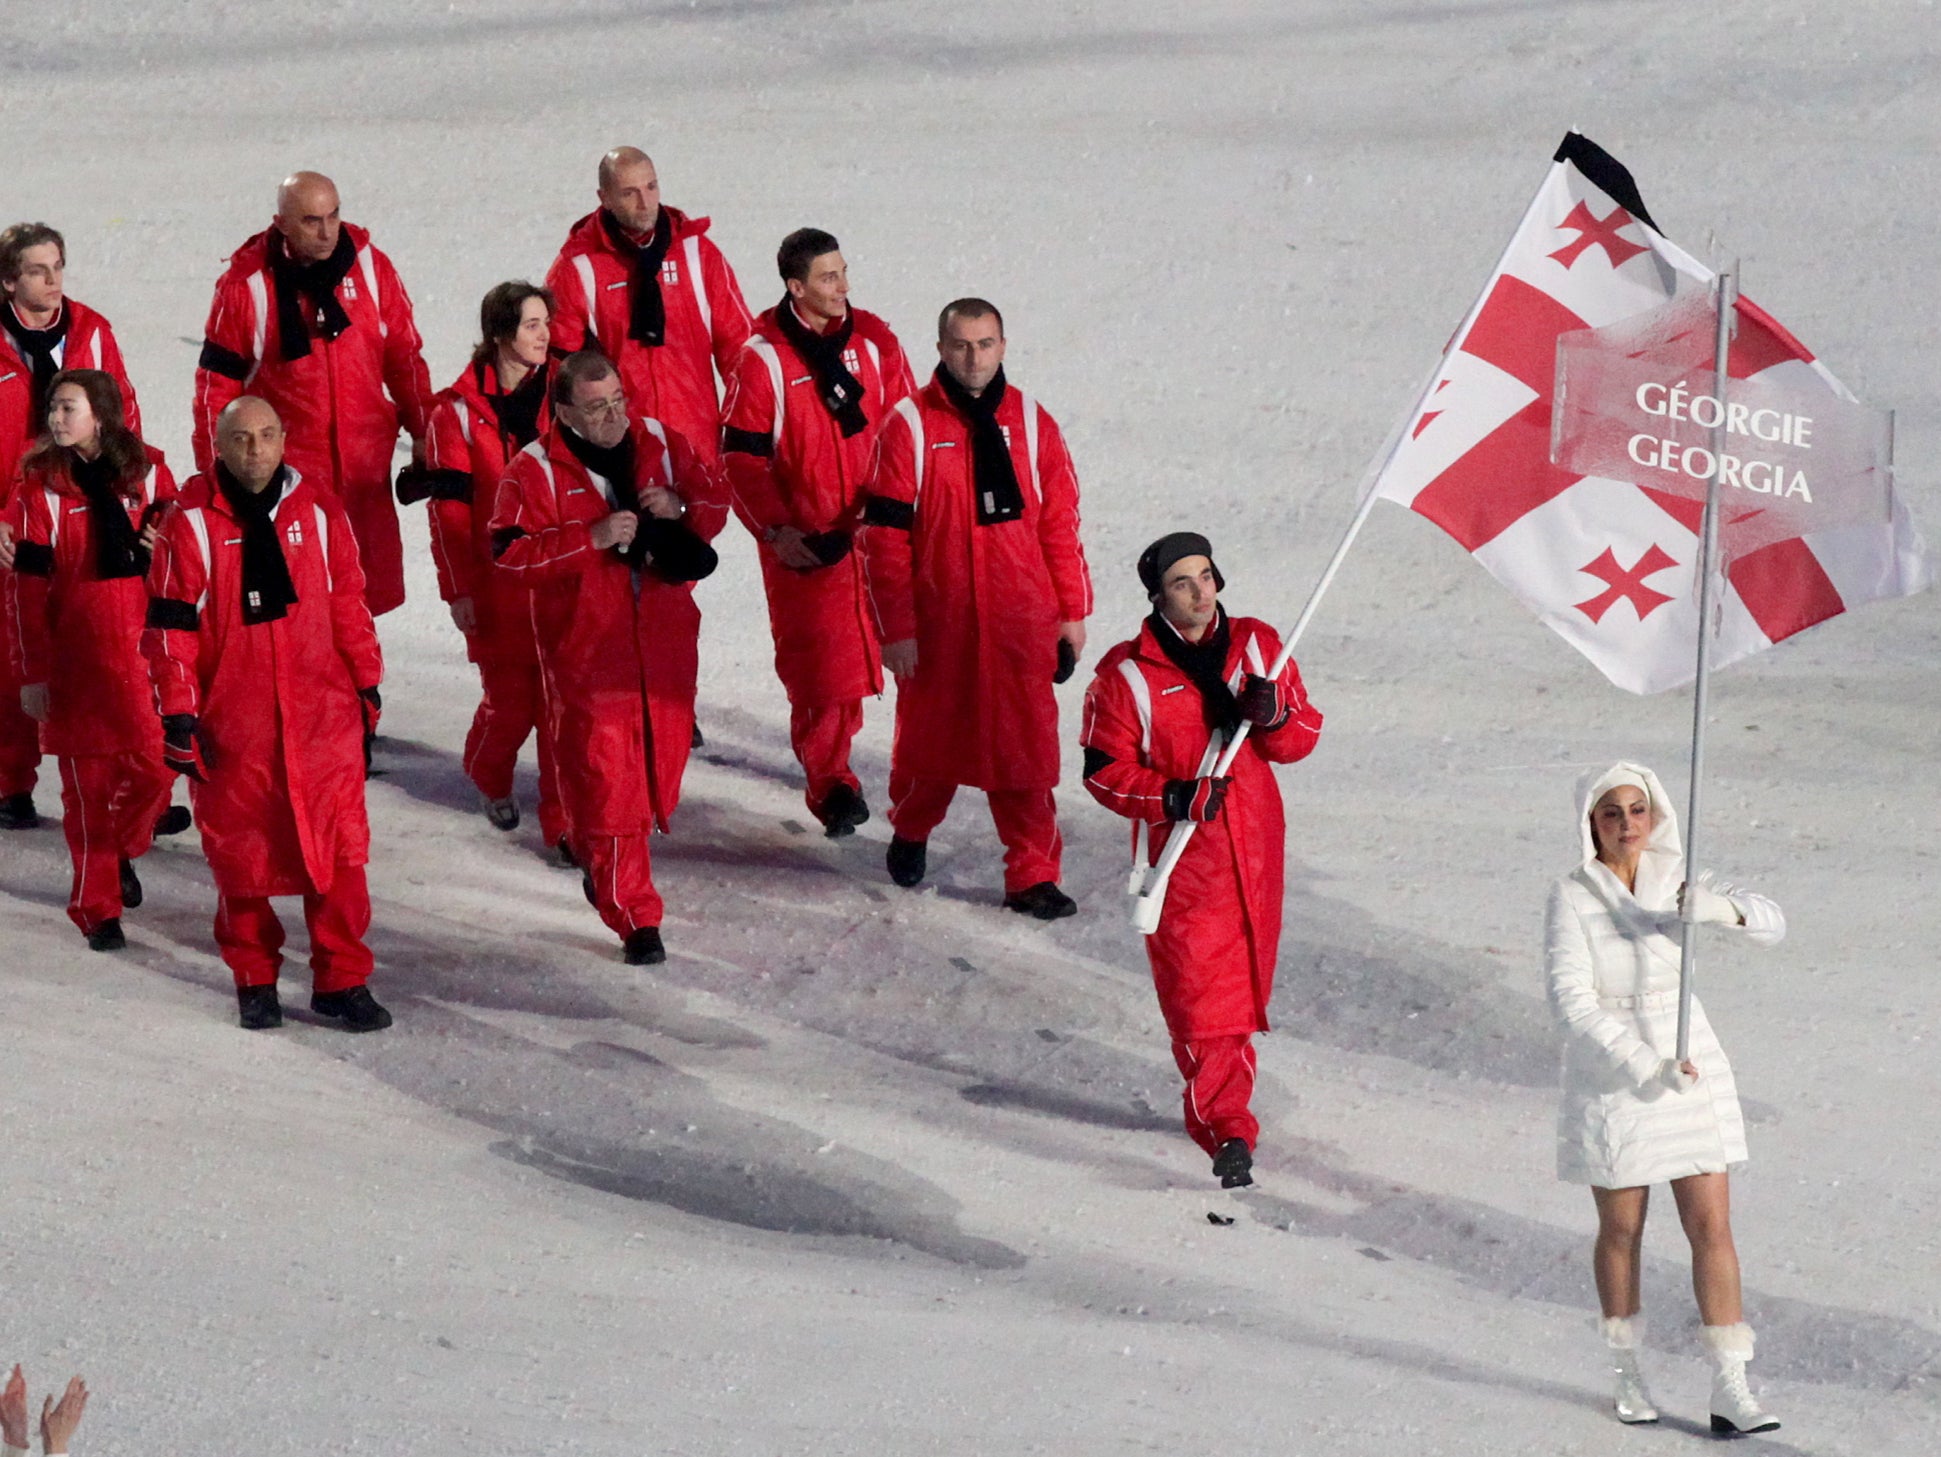 The Georgian team arrive without their luger at the 2010 opening ceremony